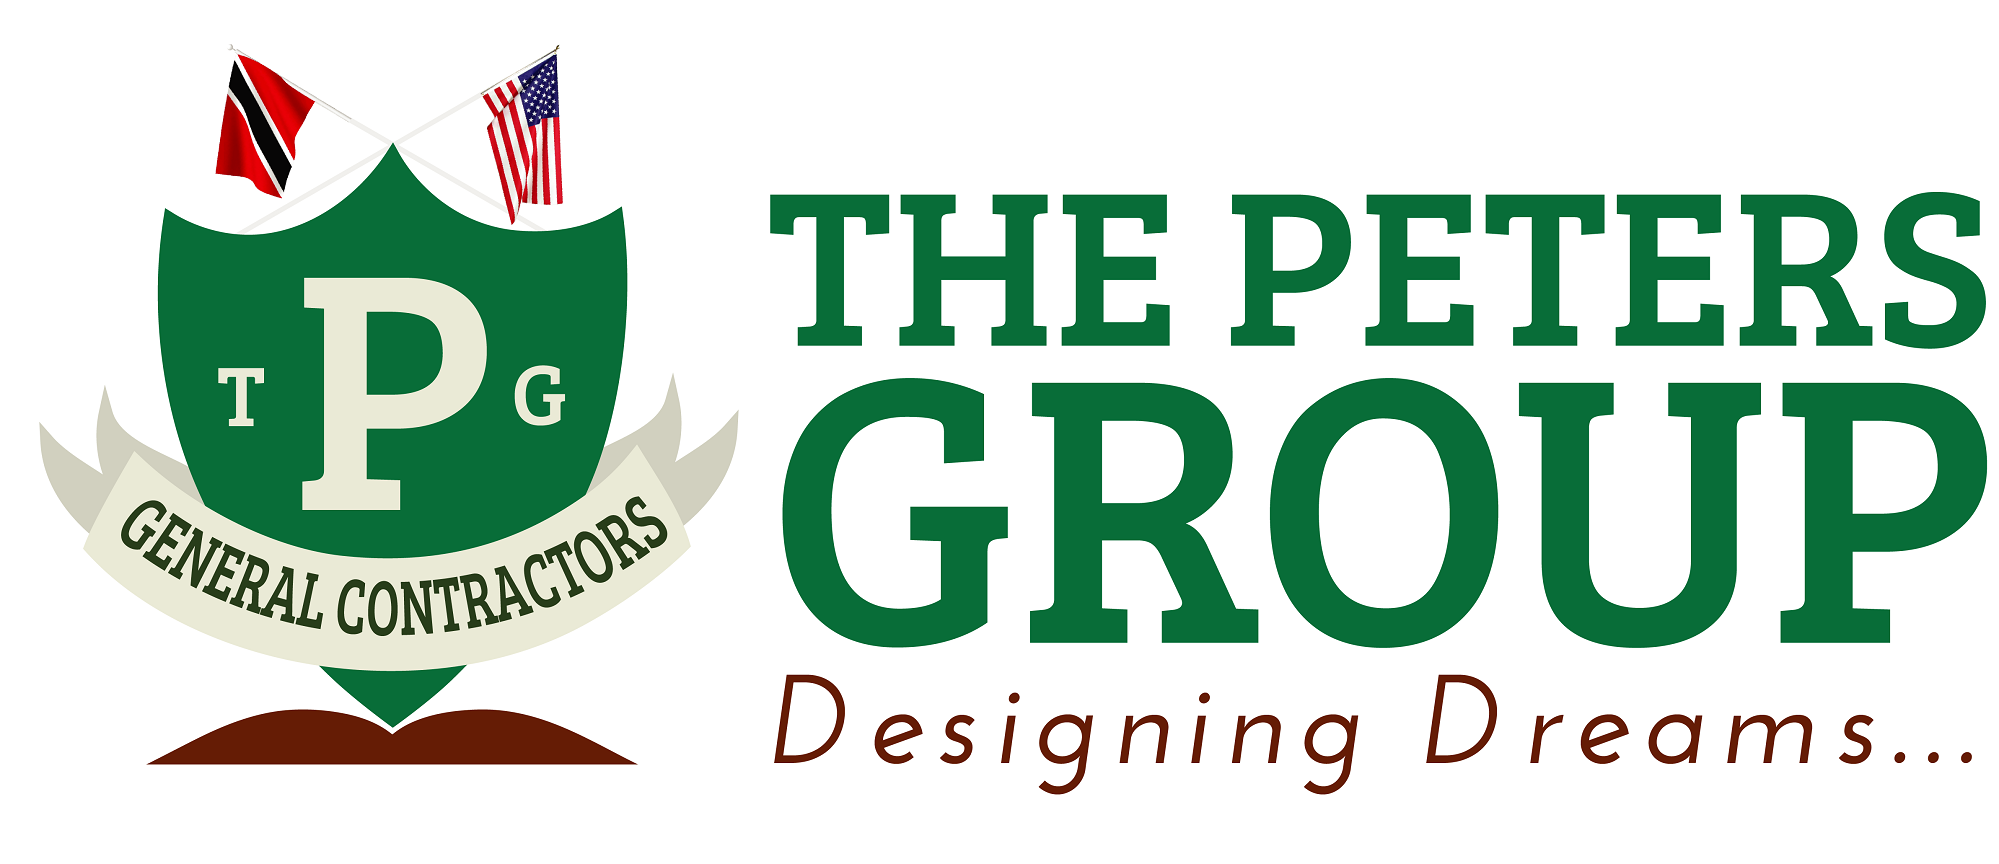 The Peters Group, LLC Logo